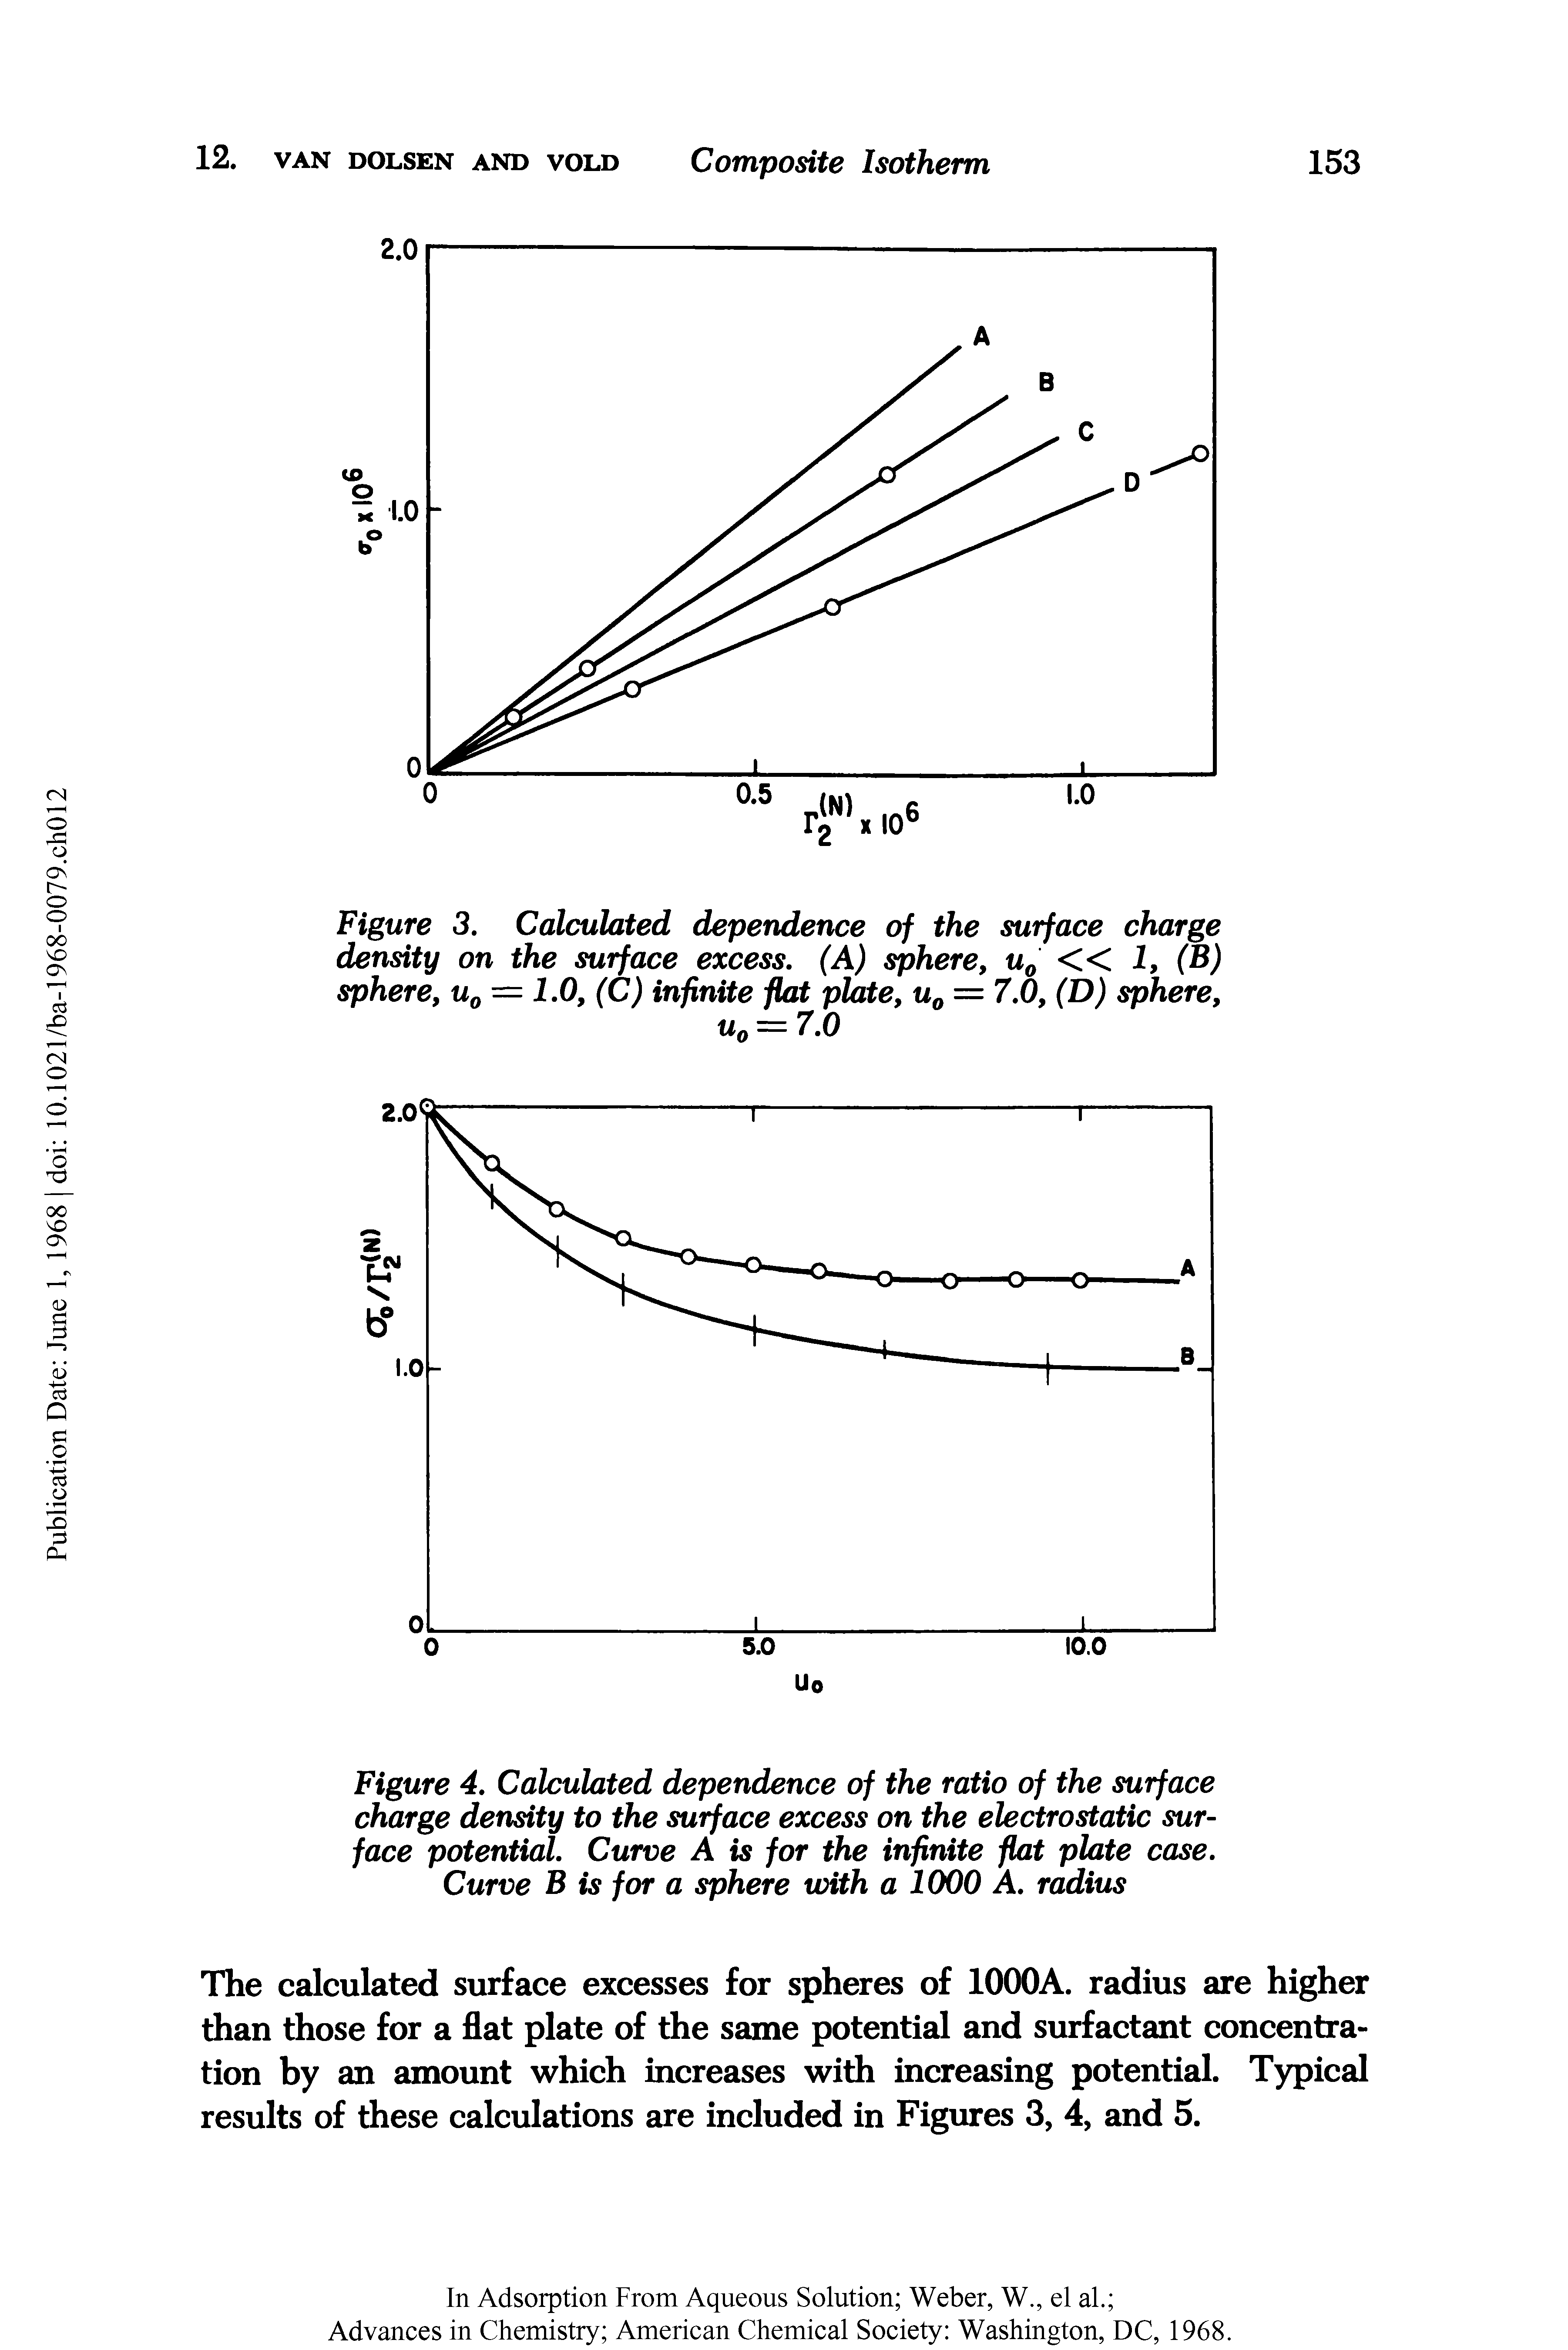 Figure 4. Calculated dependence of the ratio of the surface charge density to the surface excess on the electrostatic surface potential. Curve A is for the infinite flat plate case. Curve B is for a sphere with a 1000 A. radius...